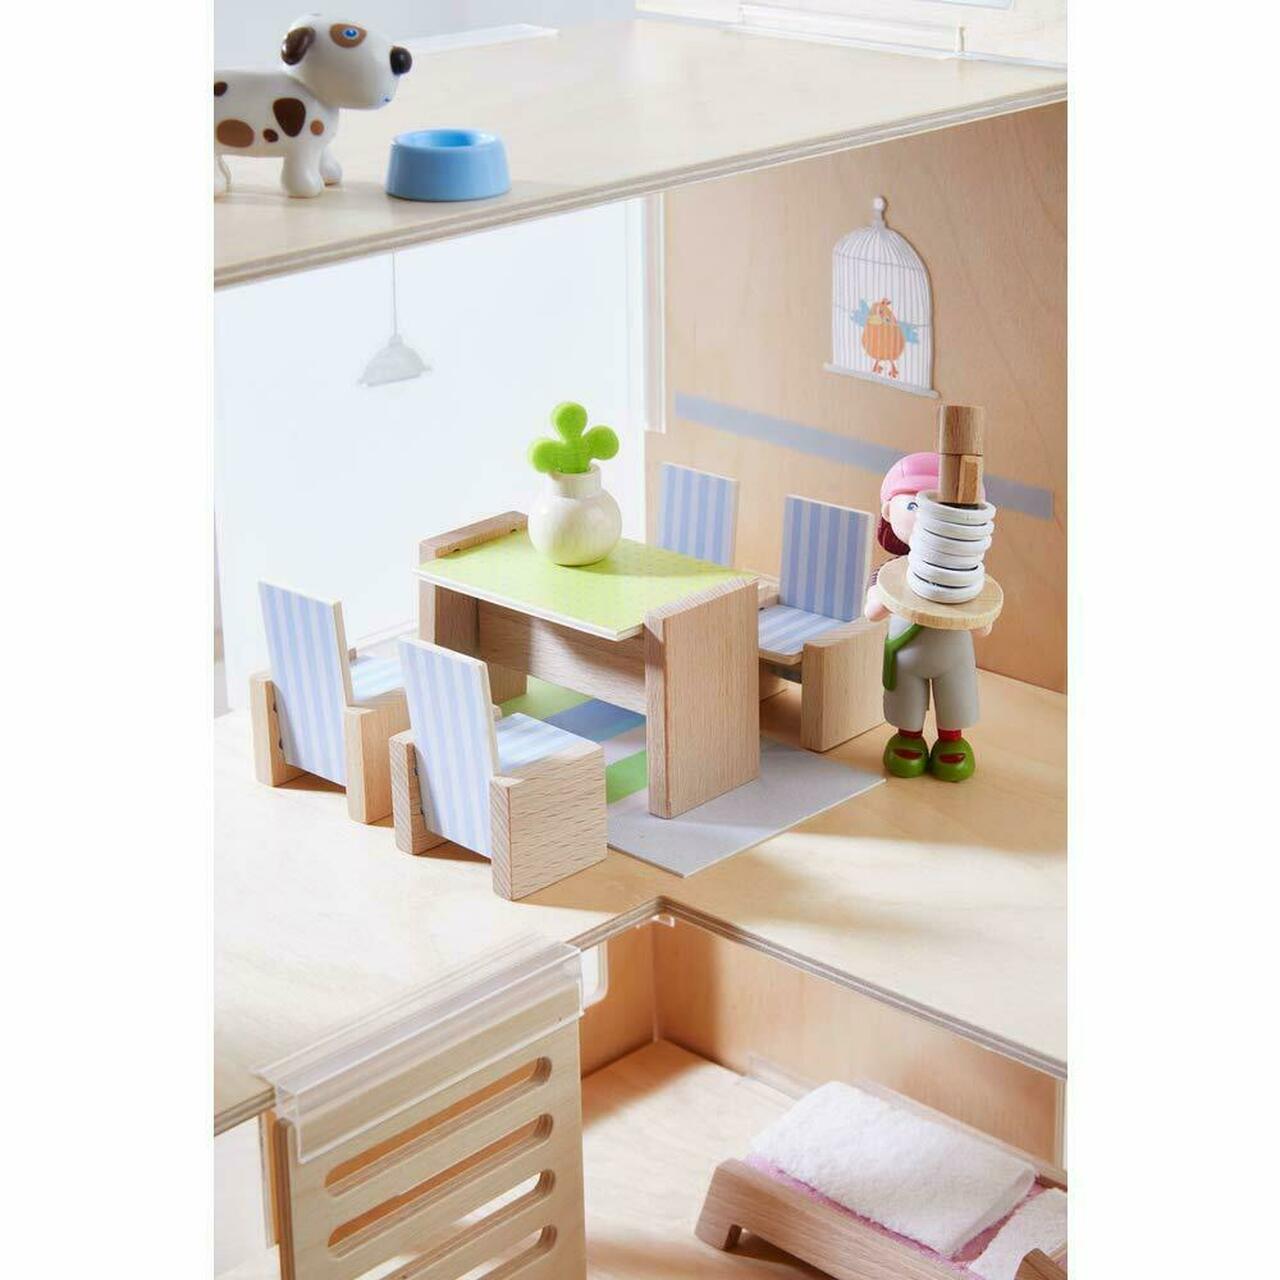 HABA Little Friends Dining Room - Miniature Play House Furniture